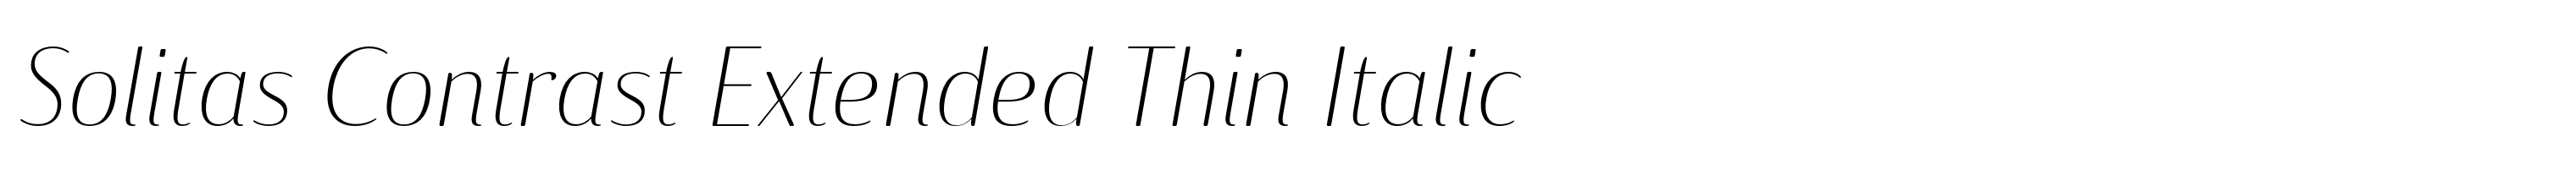 Solitas Contrast Extended Thin Italic